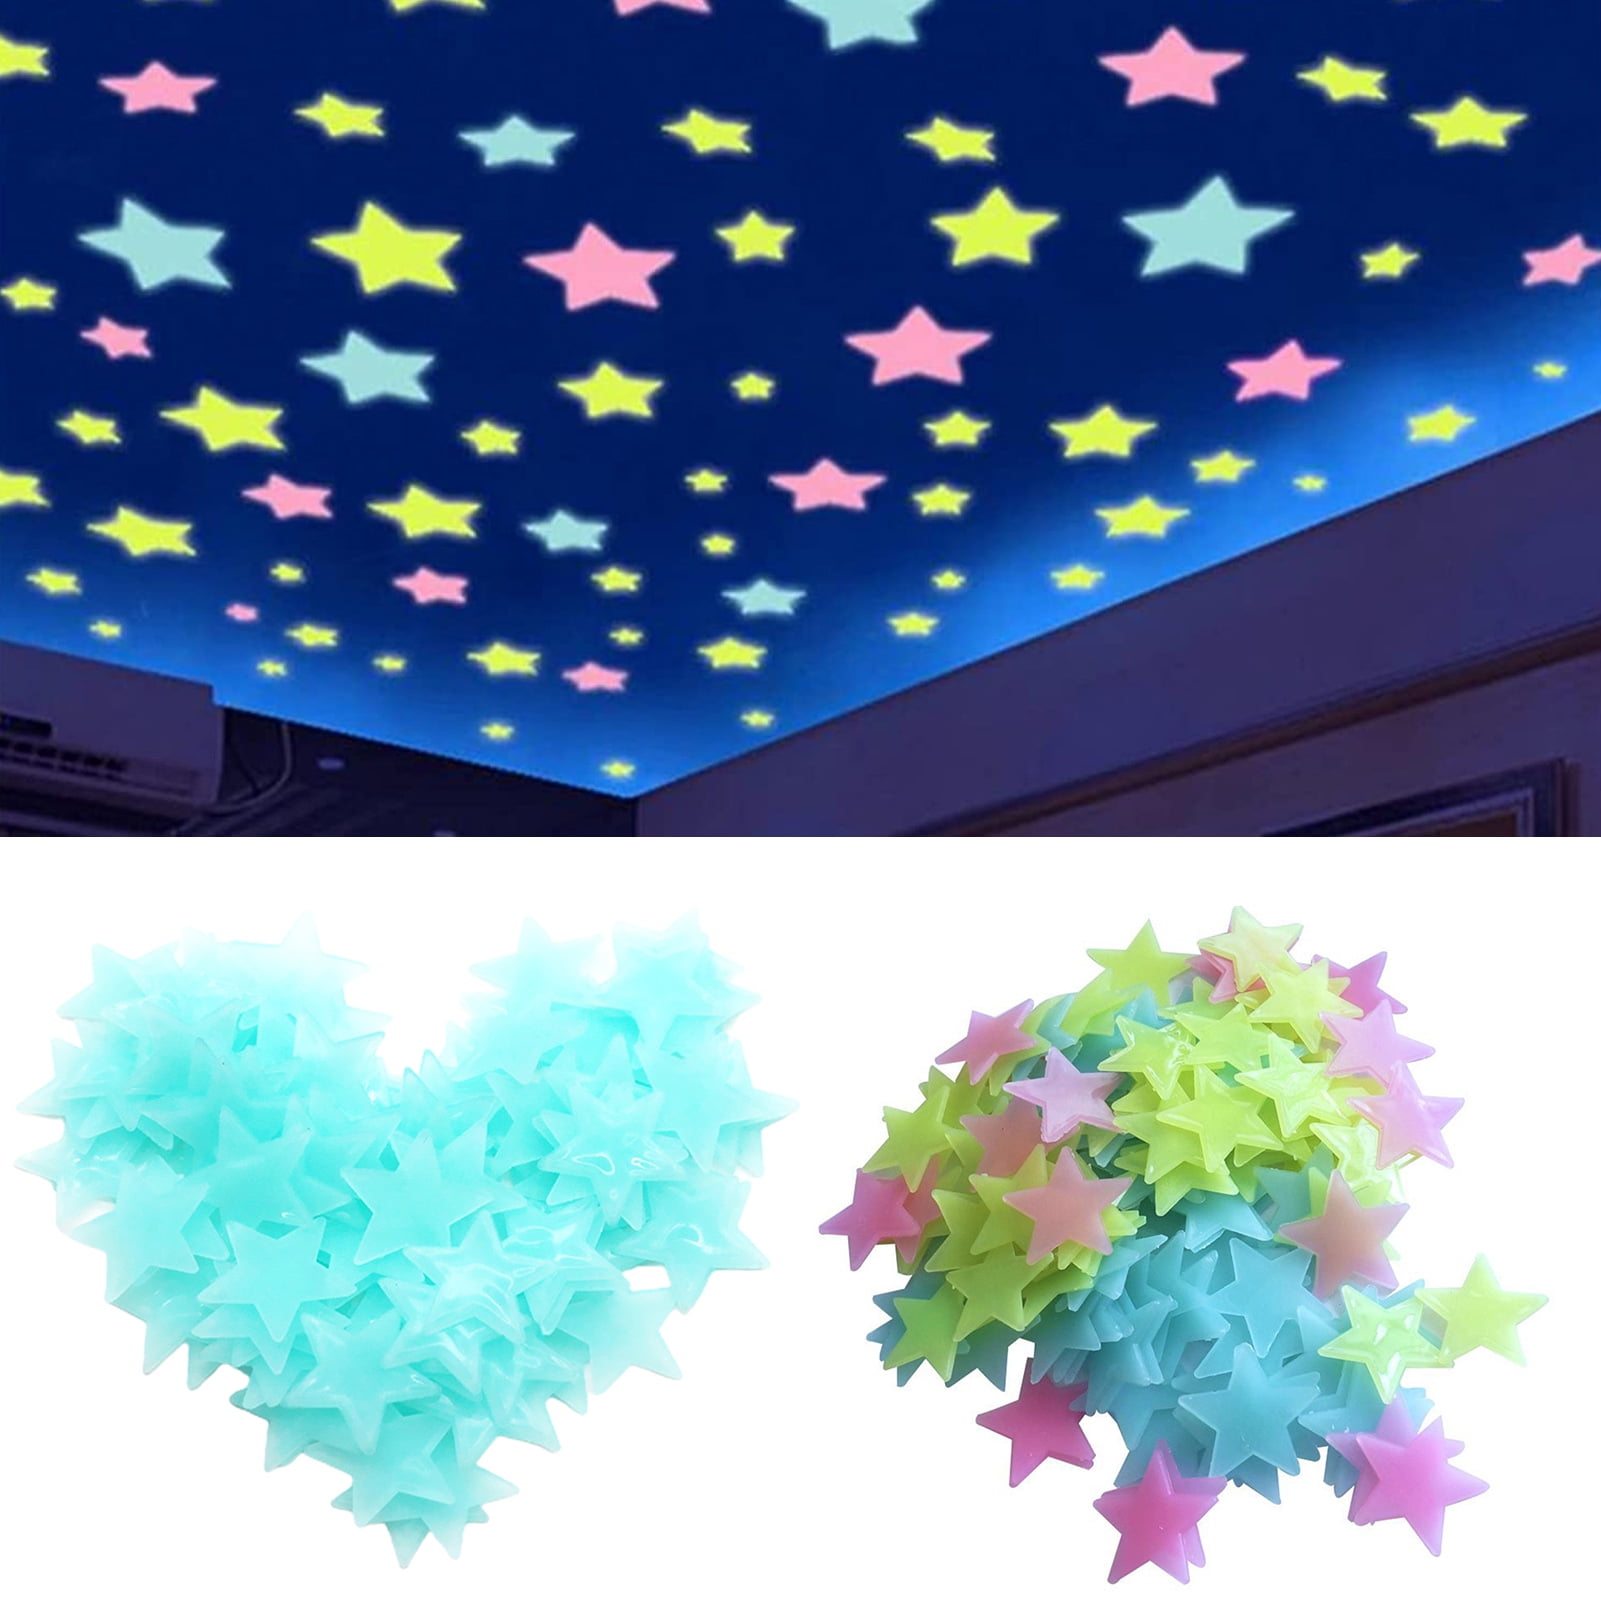 Details about   50pcs 3D Stars Glow In The Dark Luminous Fluorescent Wall Stickers Kids Bedroom 